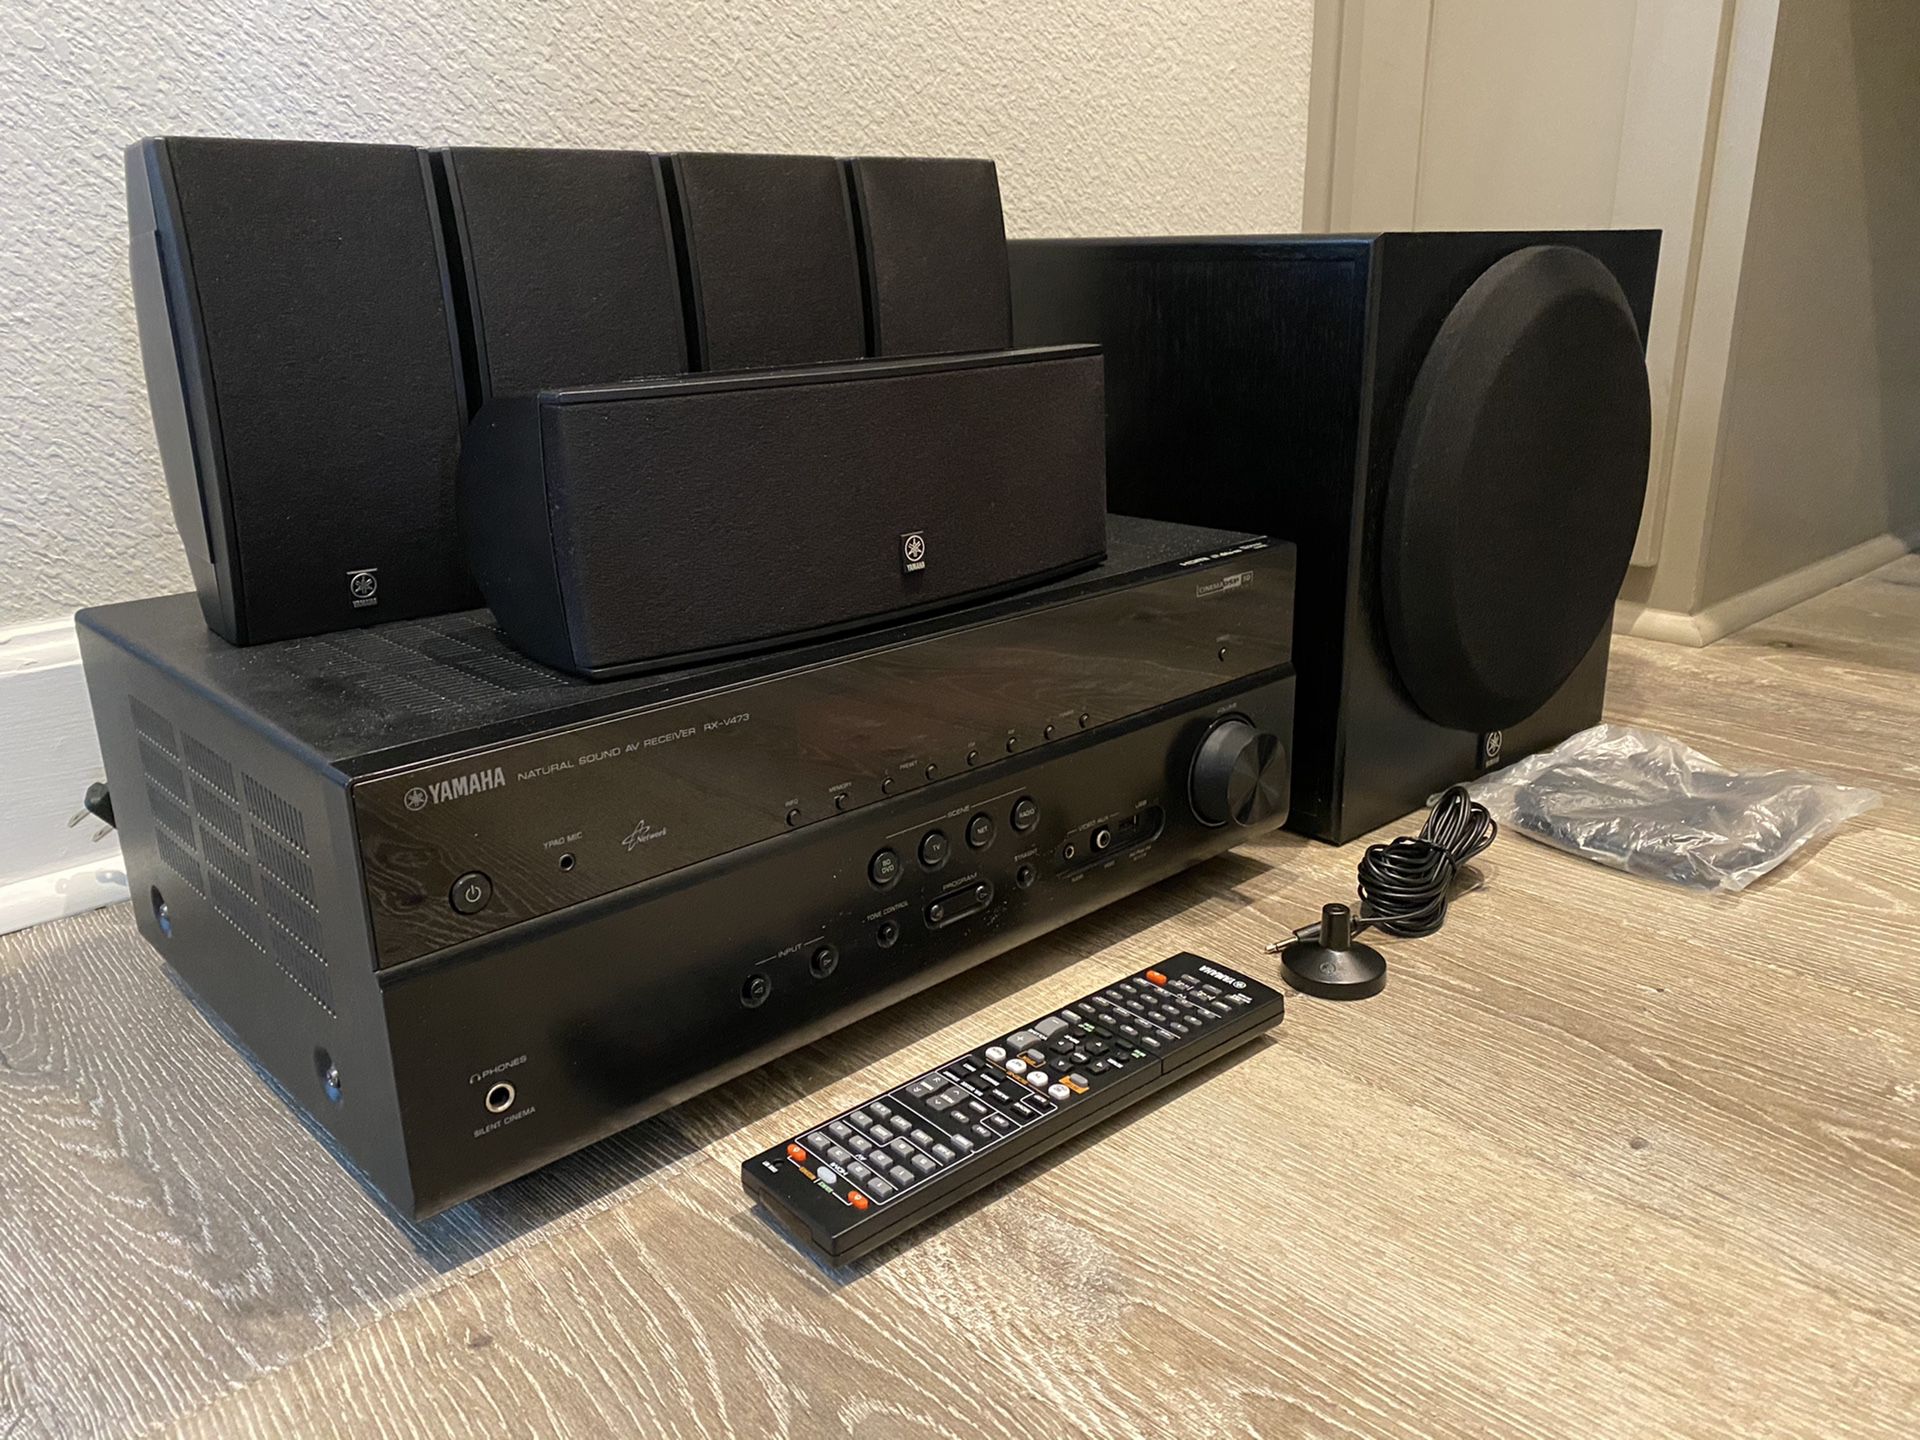 Yamaha YHT-597 Home Theater Speaker/Receiver System